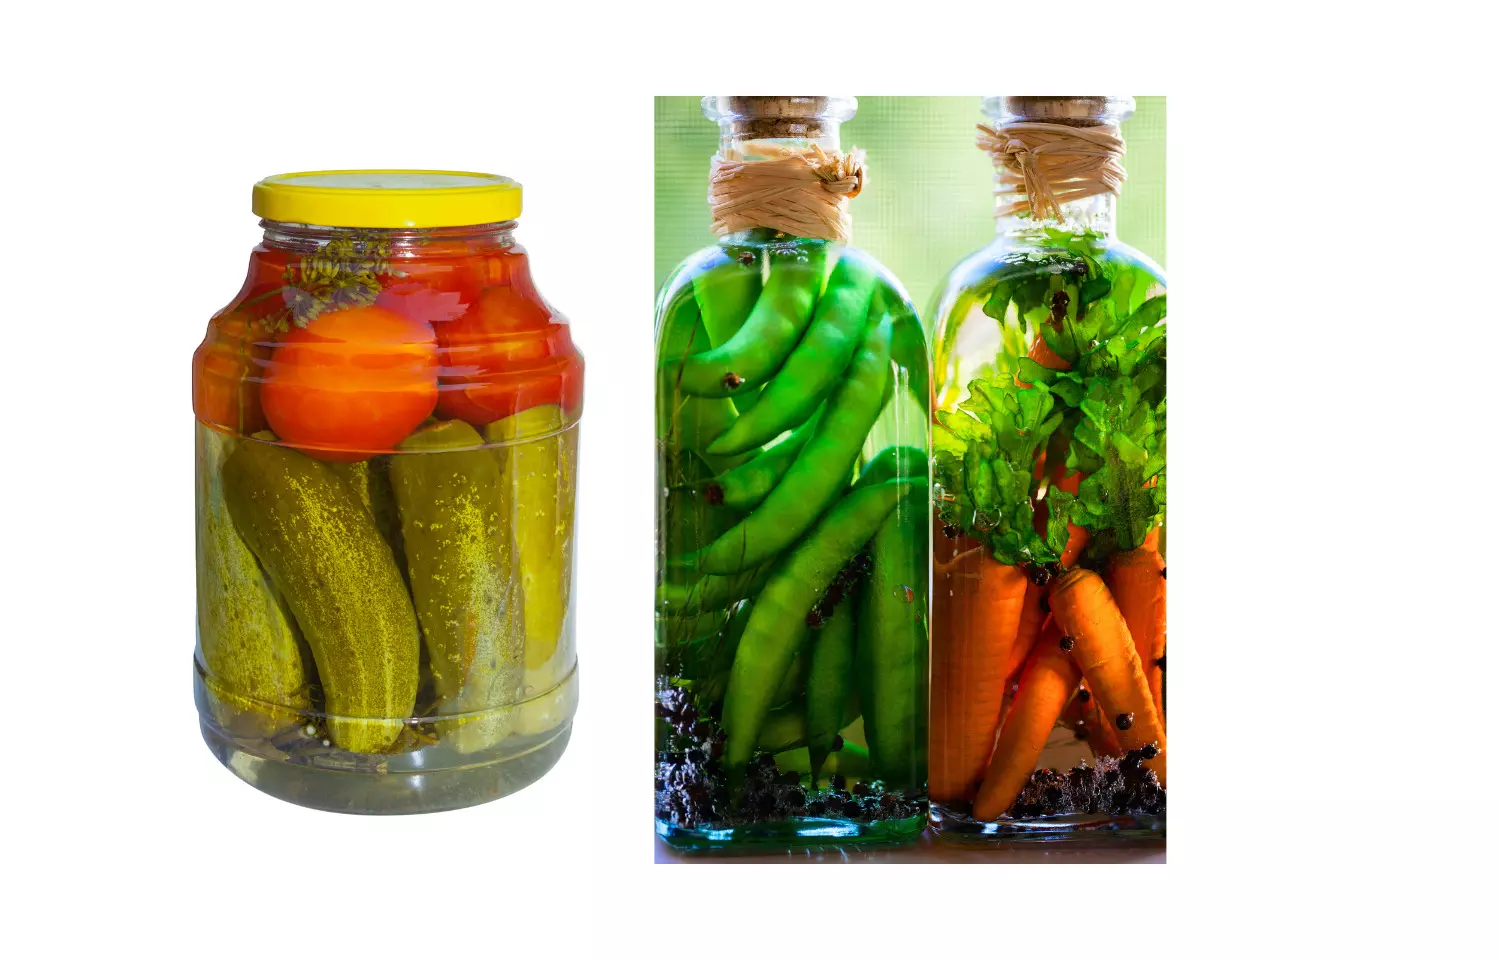 Consumption of preserved vegetables tied to higher risk of colorectal cancer: Study